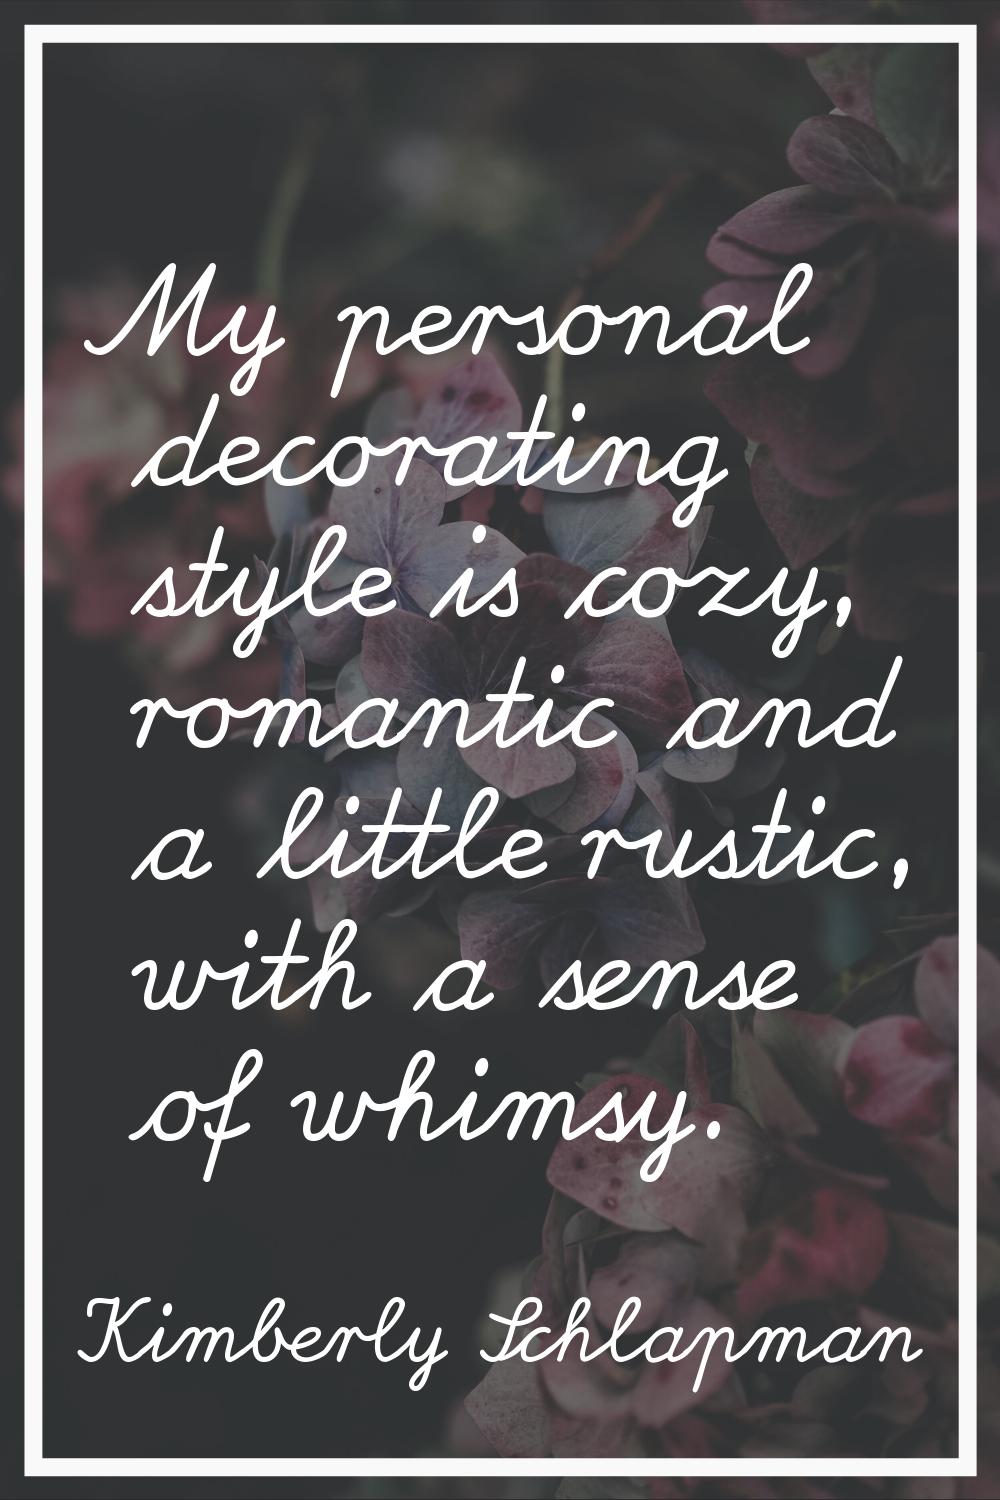 My personal decorating style is cozy, romantic and a little rustic, with a sense of whimsy.